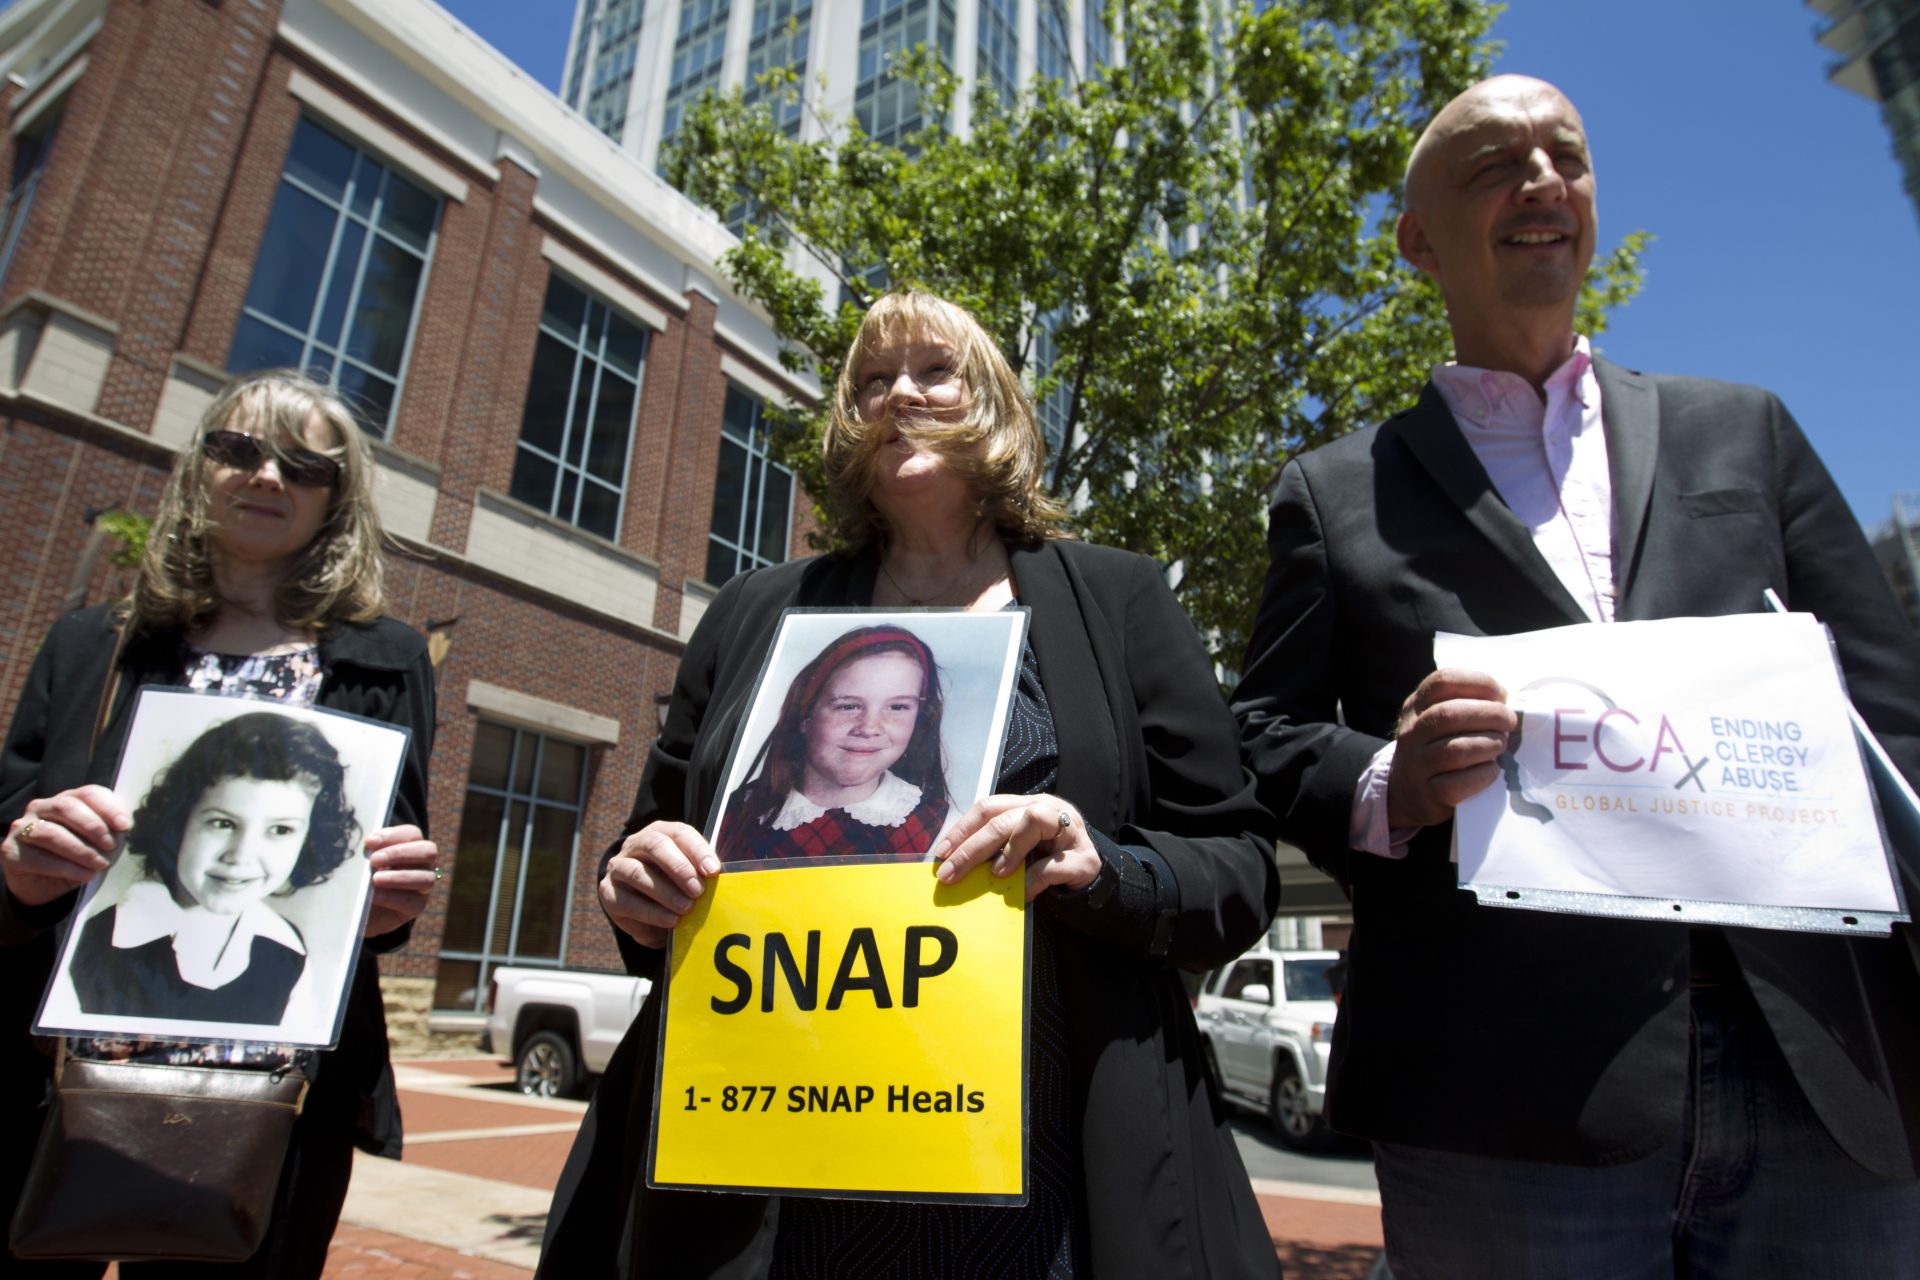 Becky Ianni, center, a victim of priest abuse, holds a picture of her younger self as she joins other demonstrators outside the venue where the United States Conference of Catholic Bishops 2019 Spring meetings are being held in Baltimore, Tuesday, June 11, 2019. Ianni says she was 8 years old when the priest of her family parish began to abuse her.